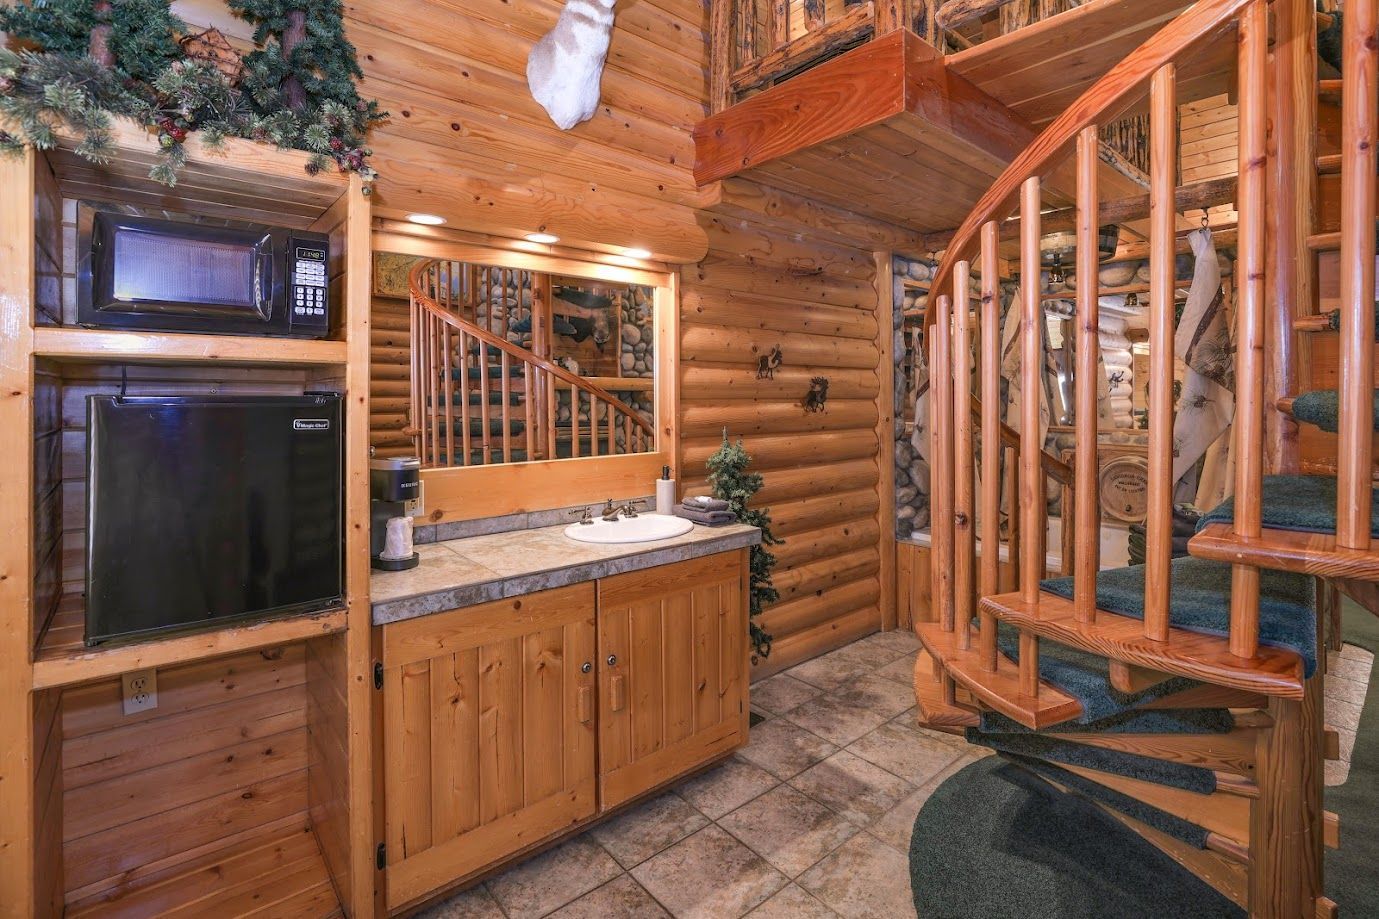 A kitchen in a log cabin with a spiral staircase leading to the second floor.